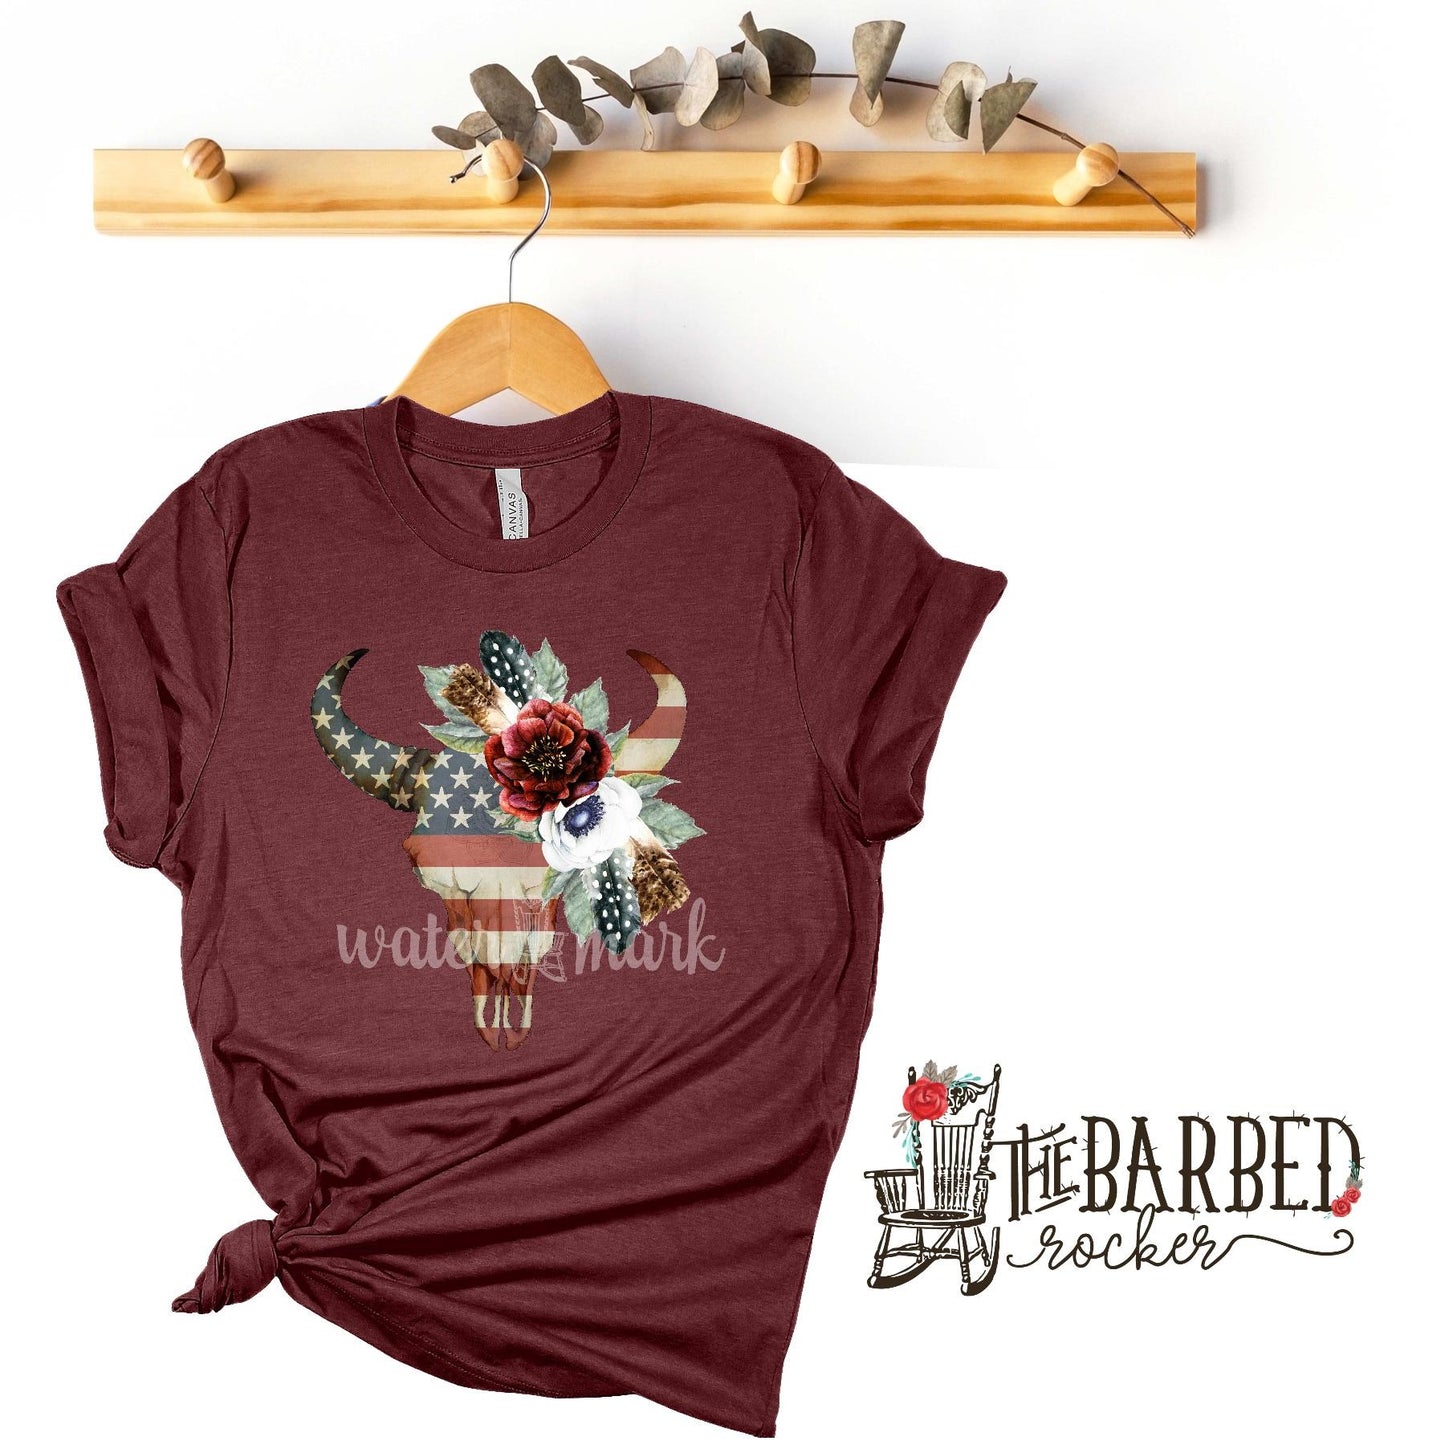 Patriotic American Bull Skull w Flowers / Feathers T-Shirt 4th of July, Americana, Celebration